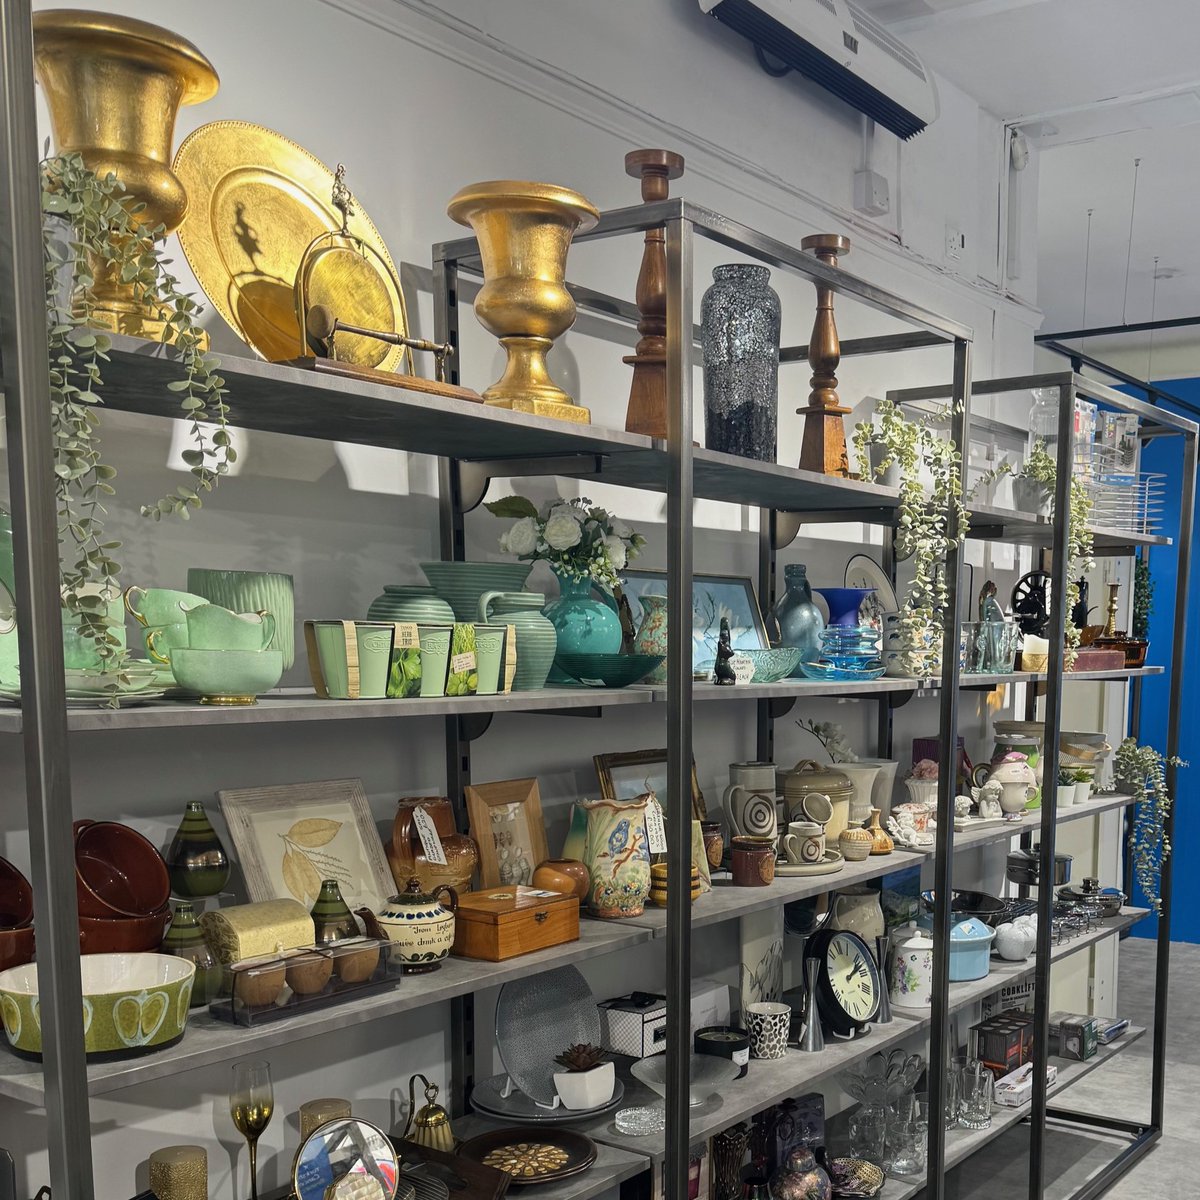 The Yorkshire Cancer Research shop in Northallerton has a new home on the high street 🏡 The shop has been part of the Northallerton community for nearly 60 years. In that time, it has raised £1 million for world-leading cancer research in Yorkshire. 📌 yorkshirecancerresearch.org.uk/shop/northalle…